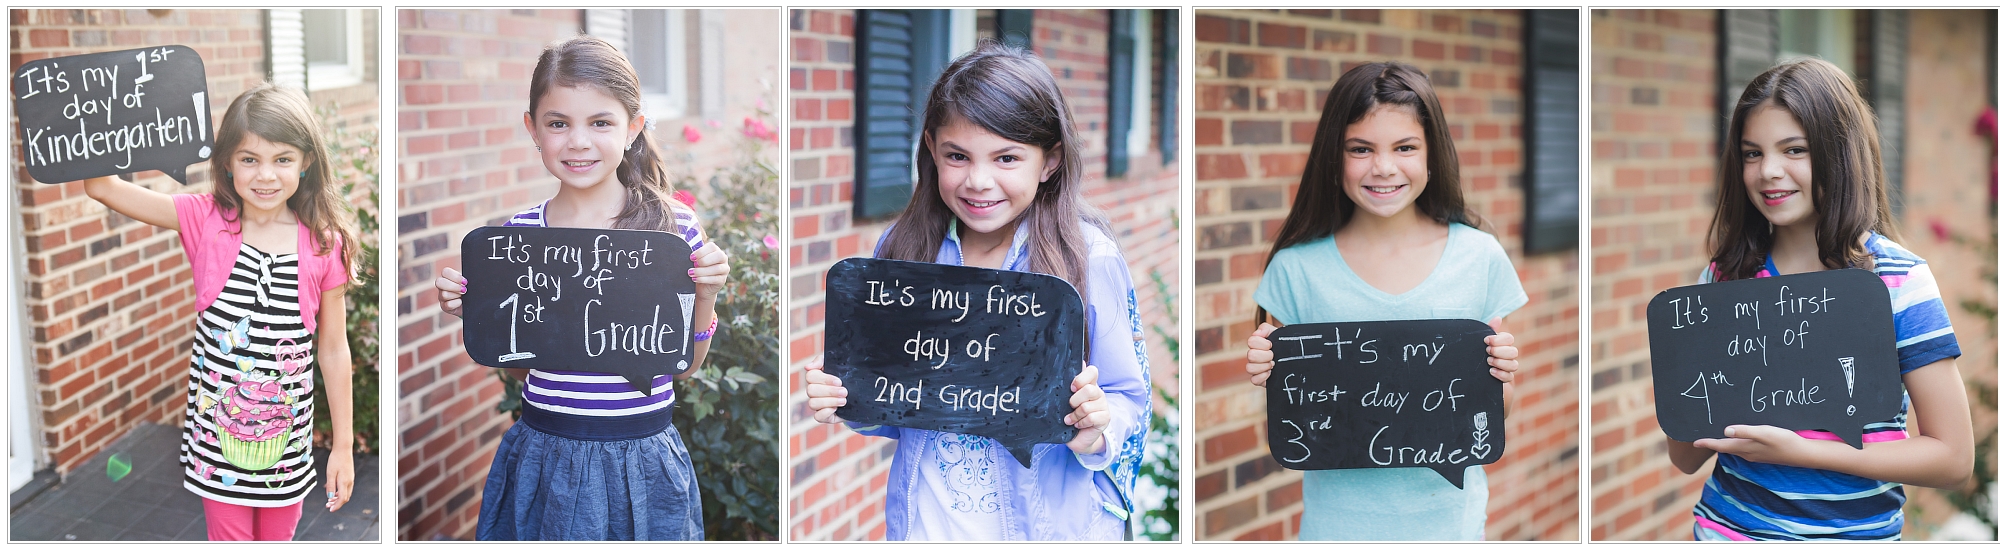 first day of school photos kristina rose photography